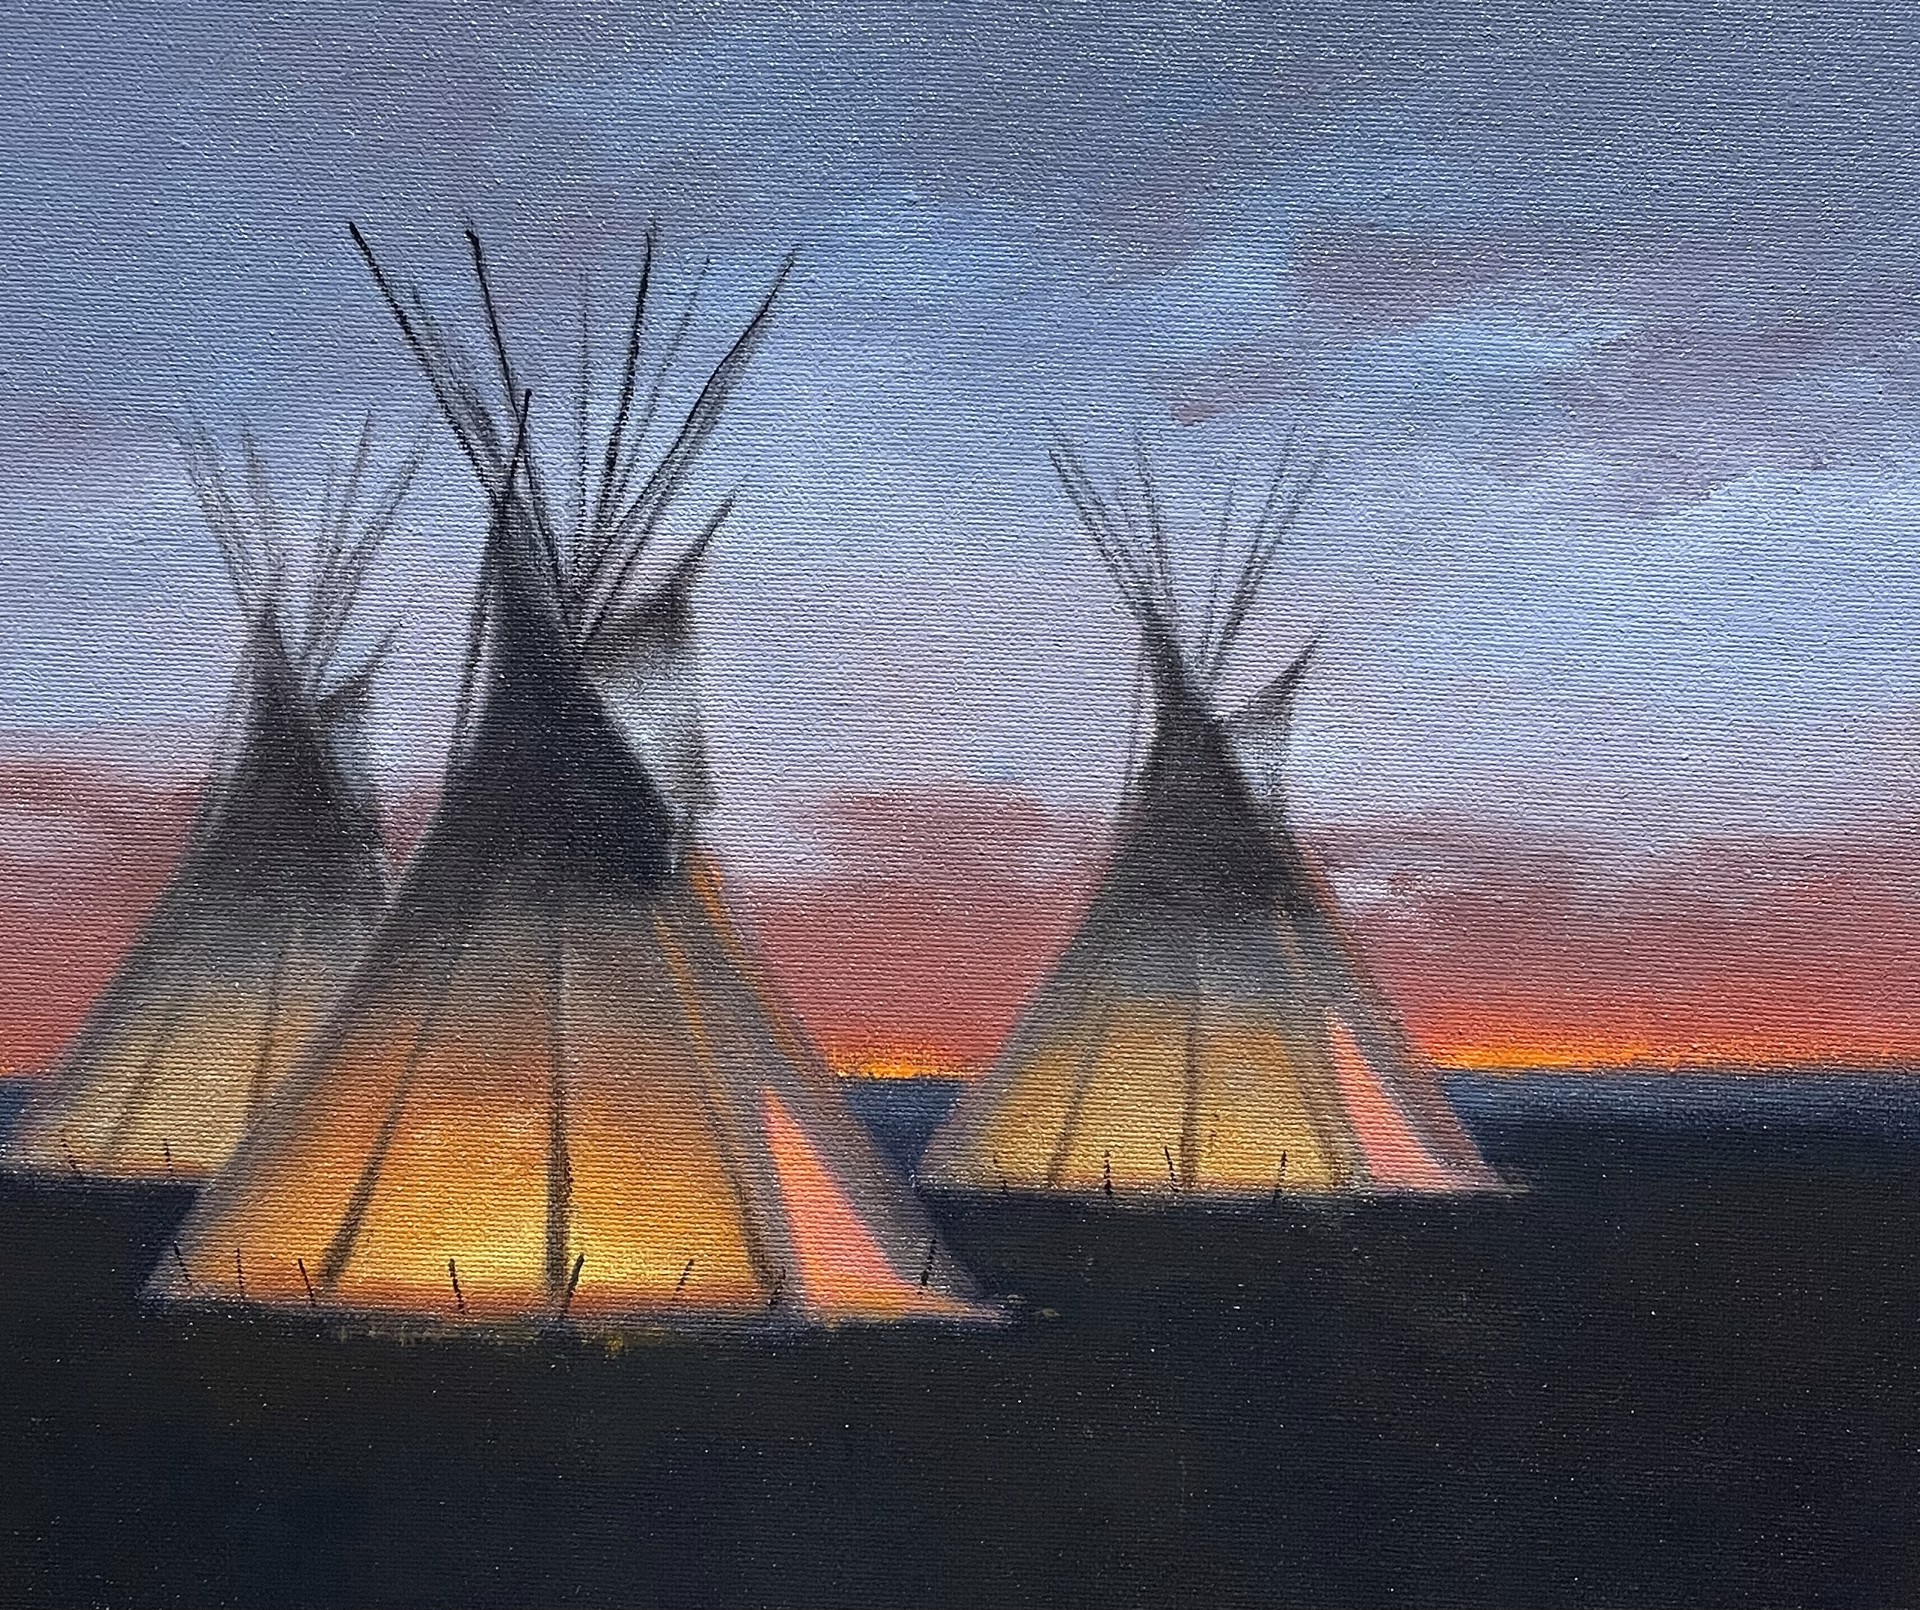 FIRE AND SKY STUDY by Mark Gibson